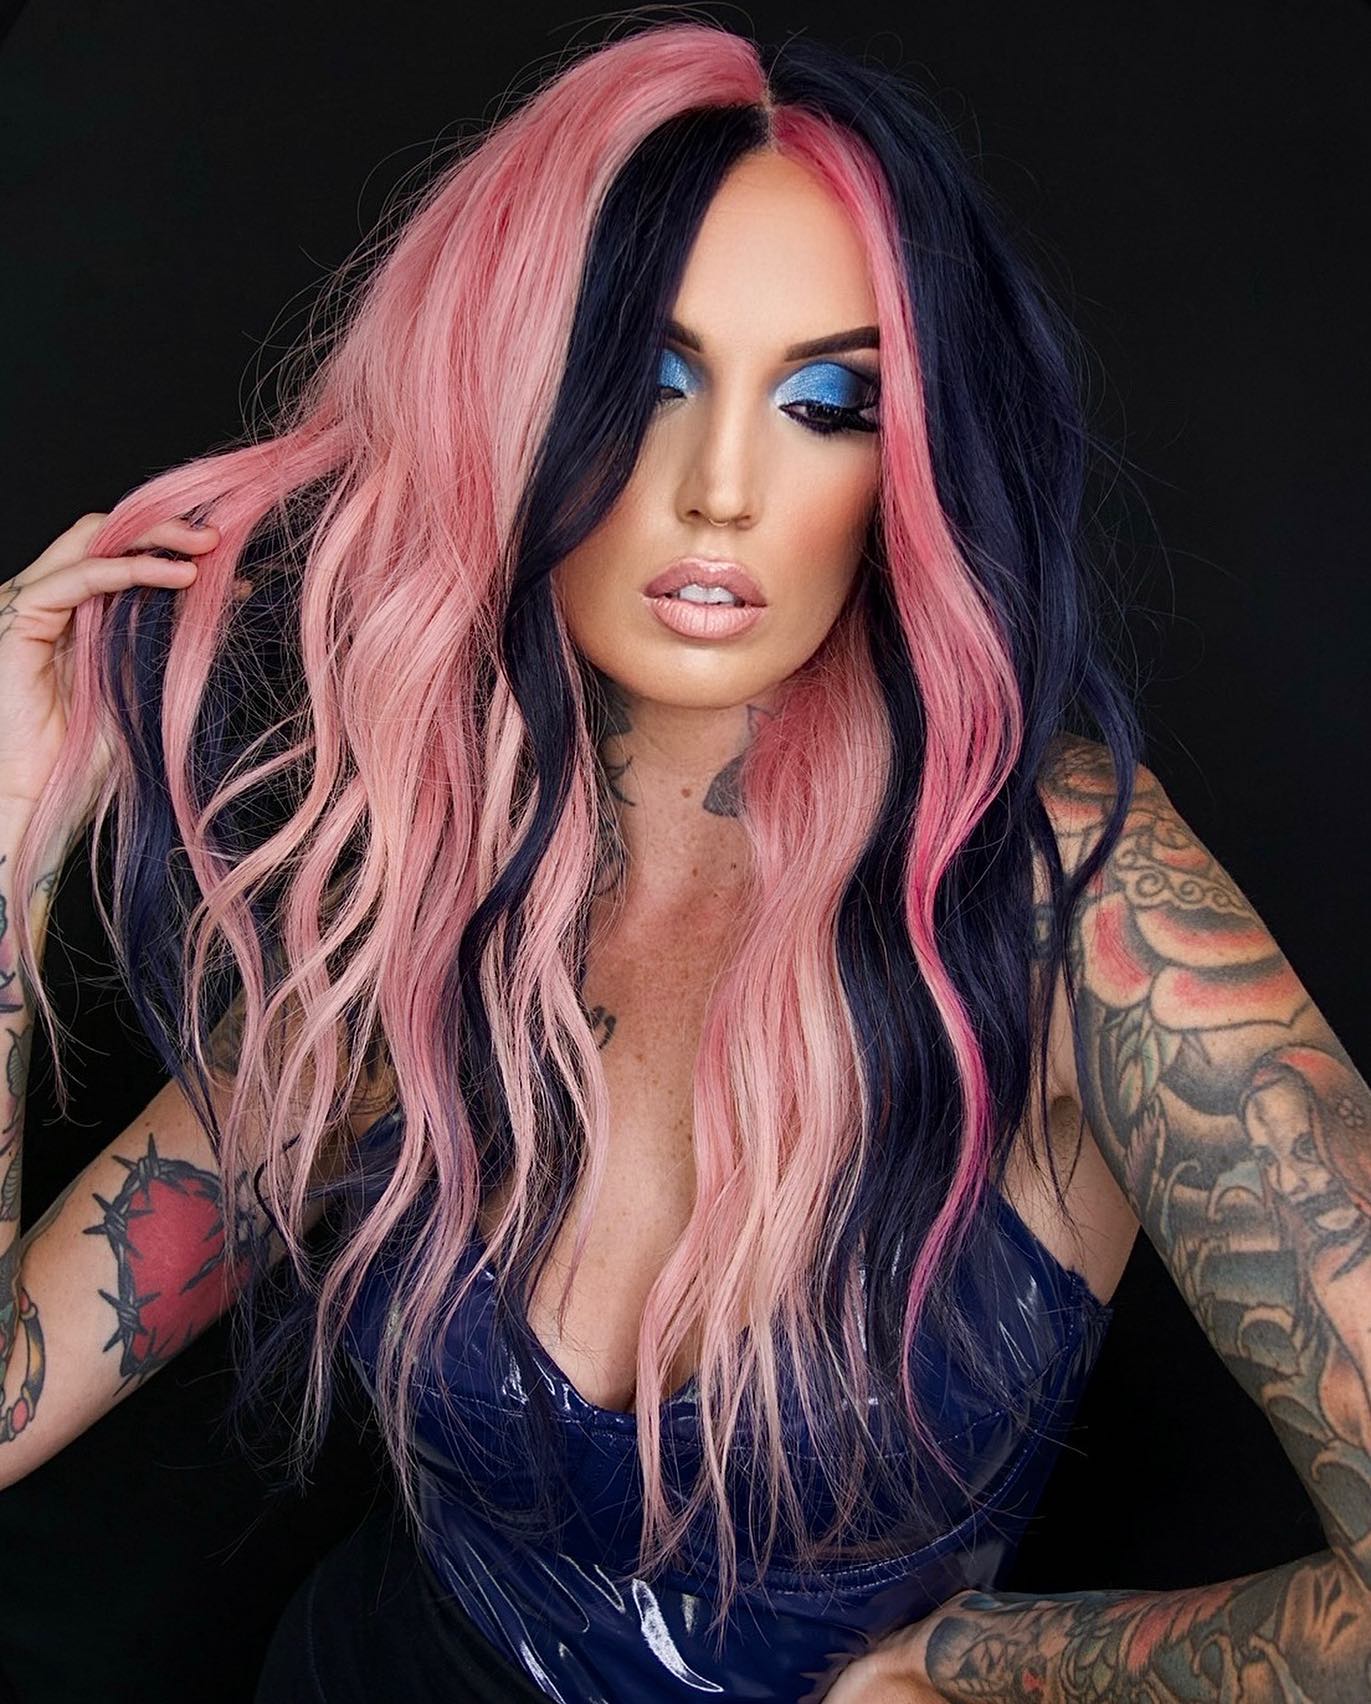 100+ Best Colorful Hair Ideas images 15